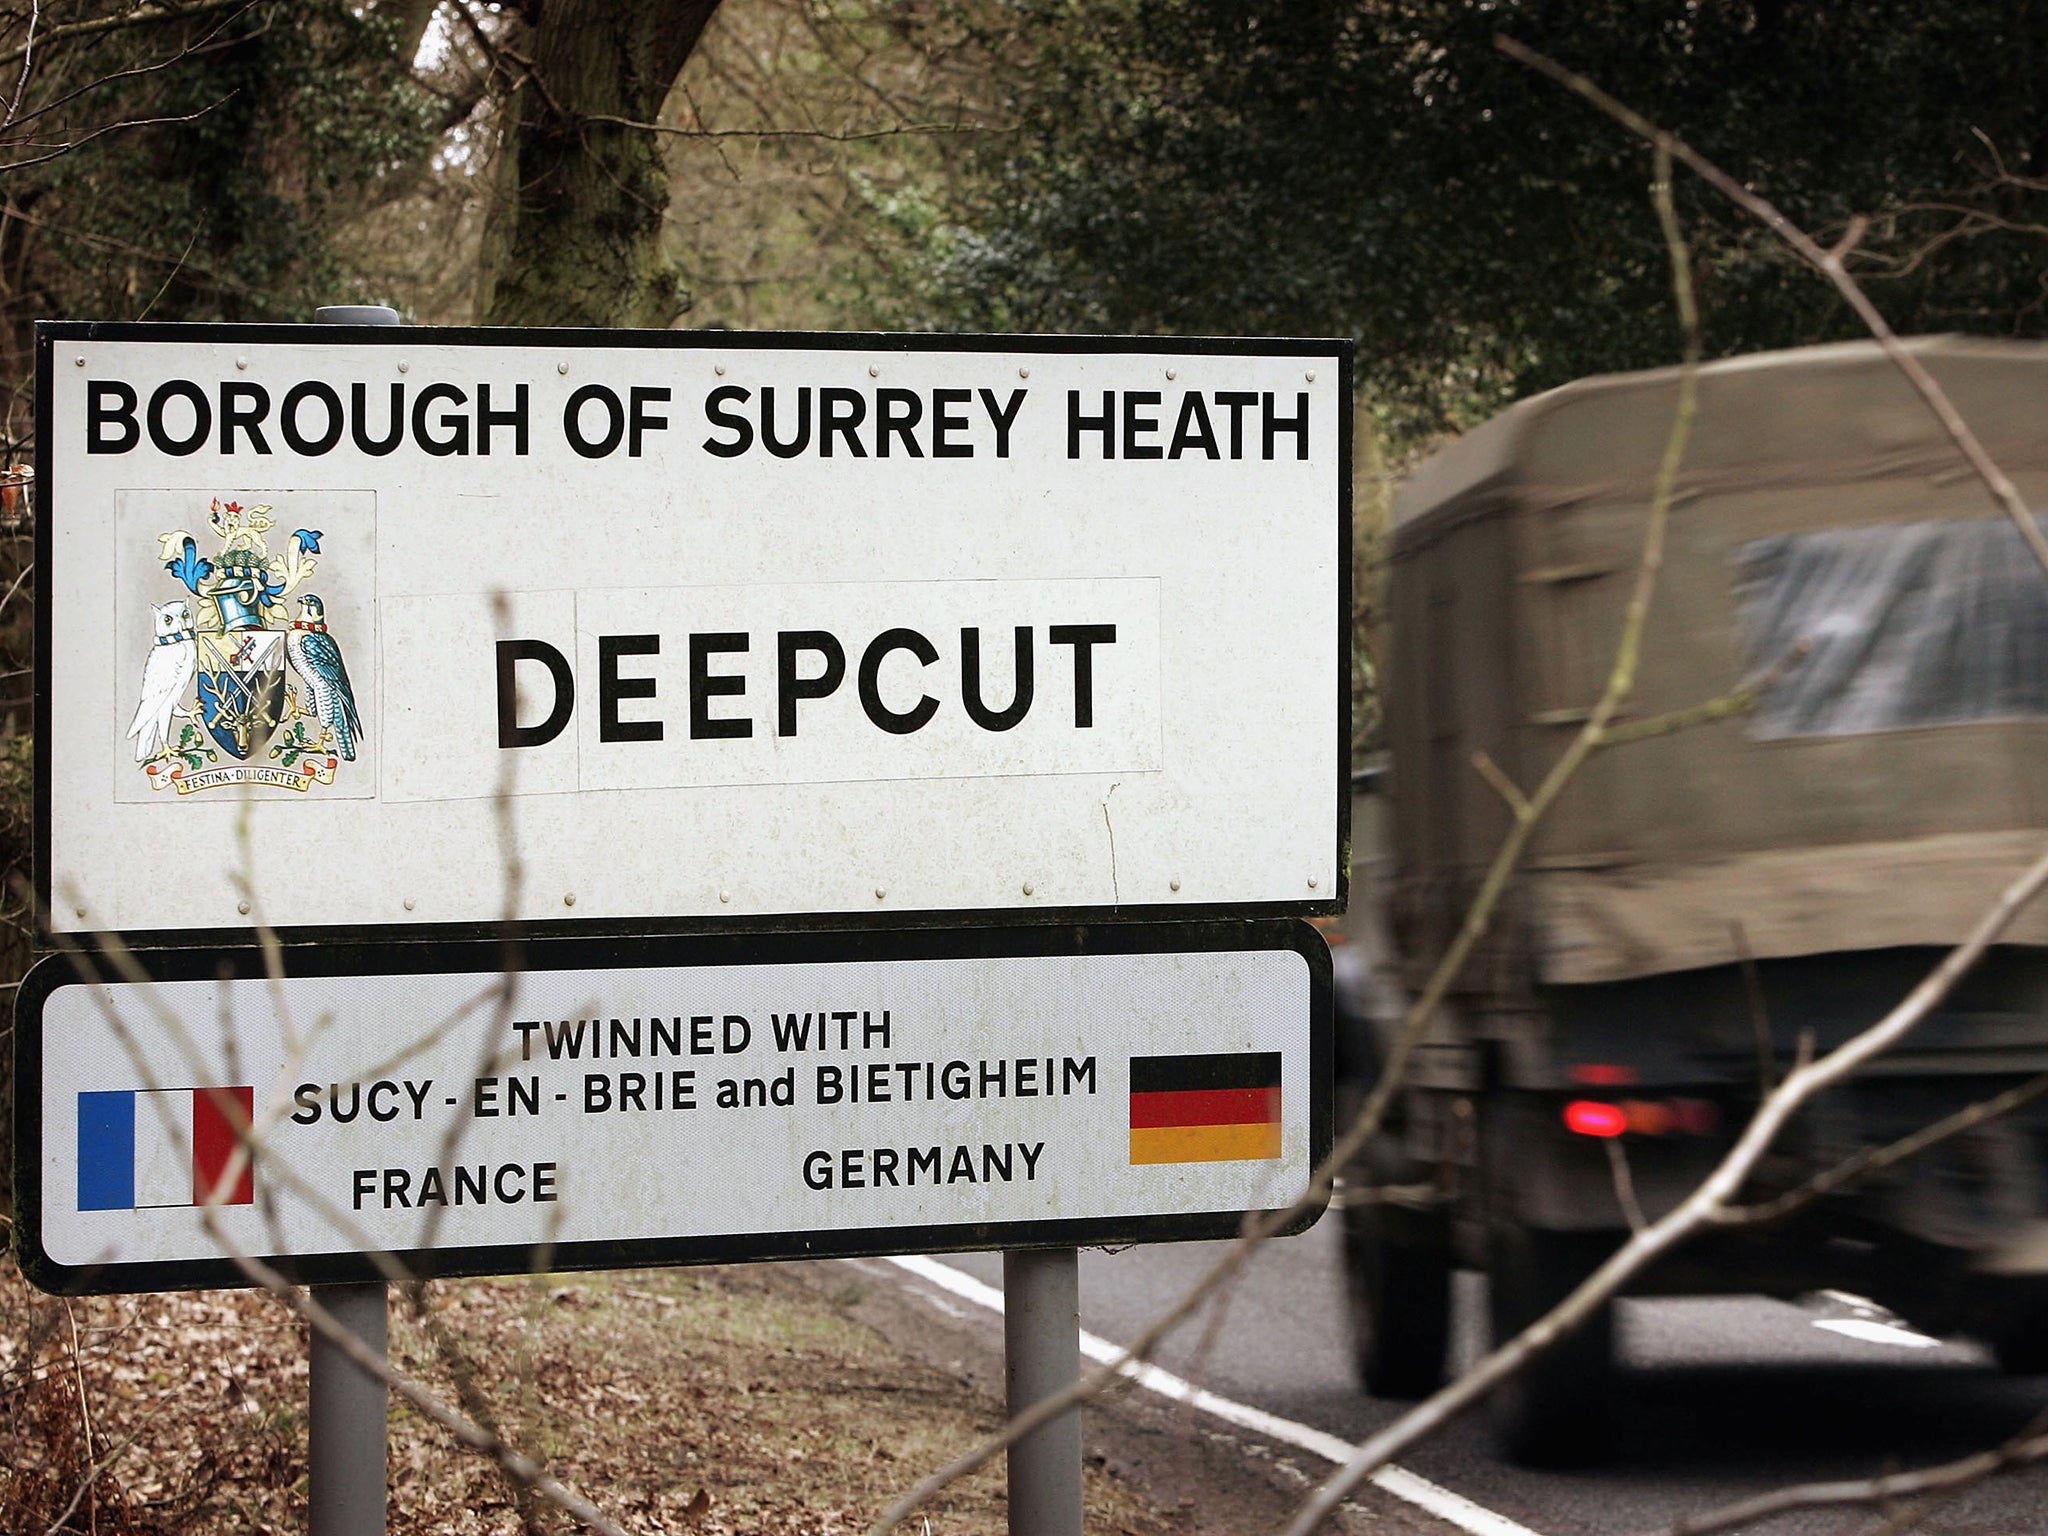 Four young recruits were found shot dead at Deepcut between 1995 and 2002, amid claims of a culture of abuse and bullying at the army barracks